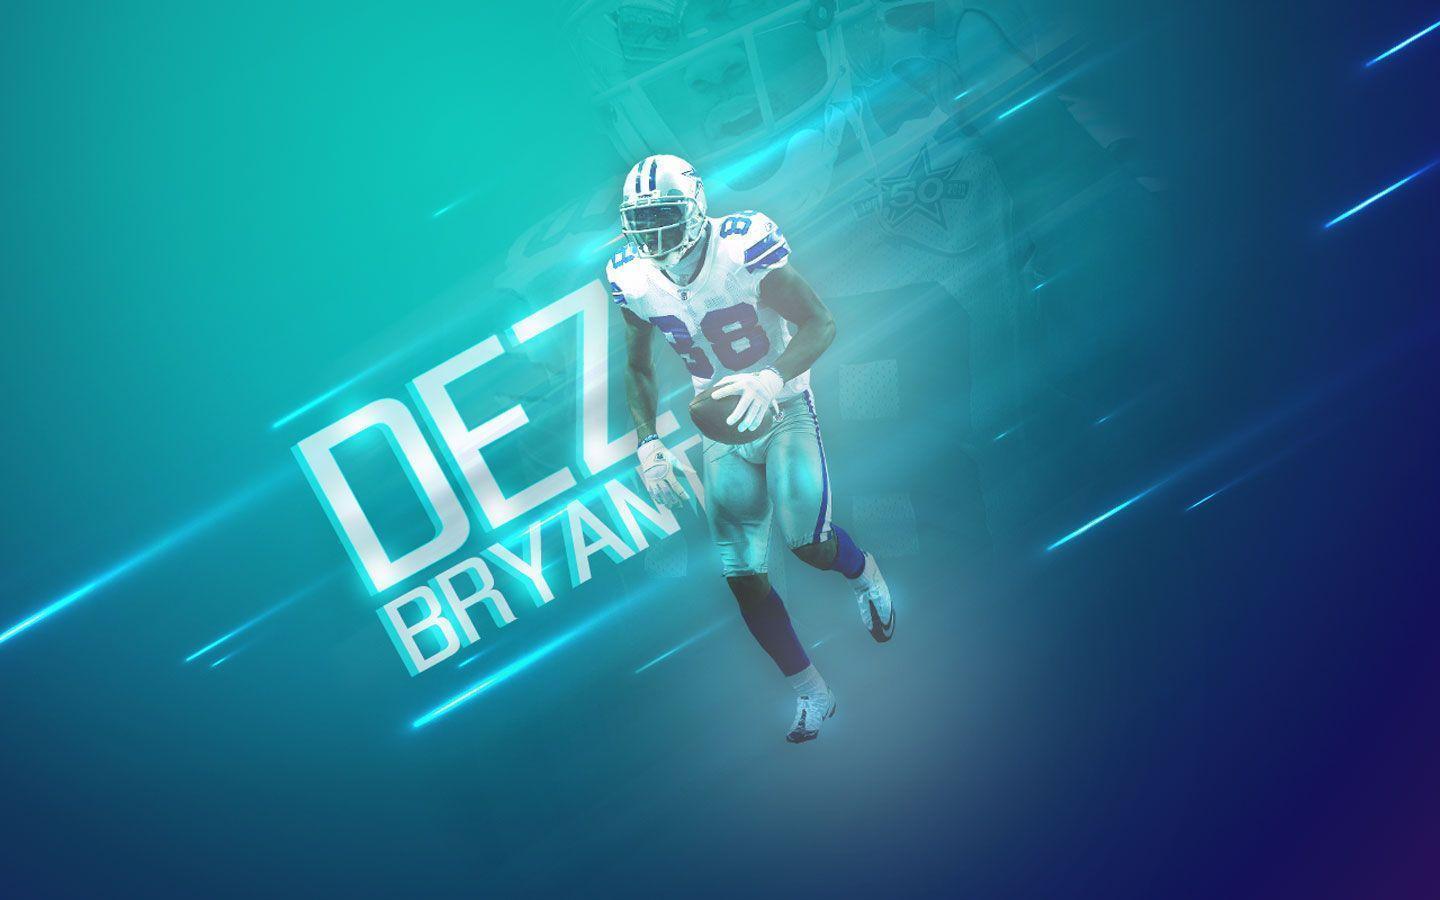 Awesome Player wallpaper